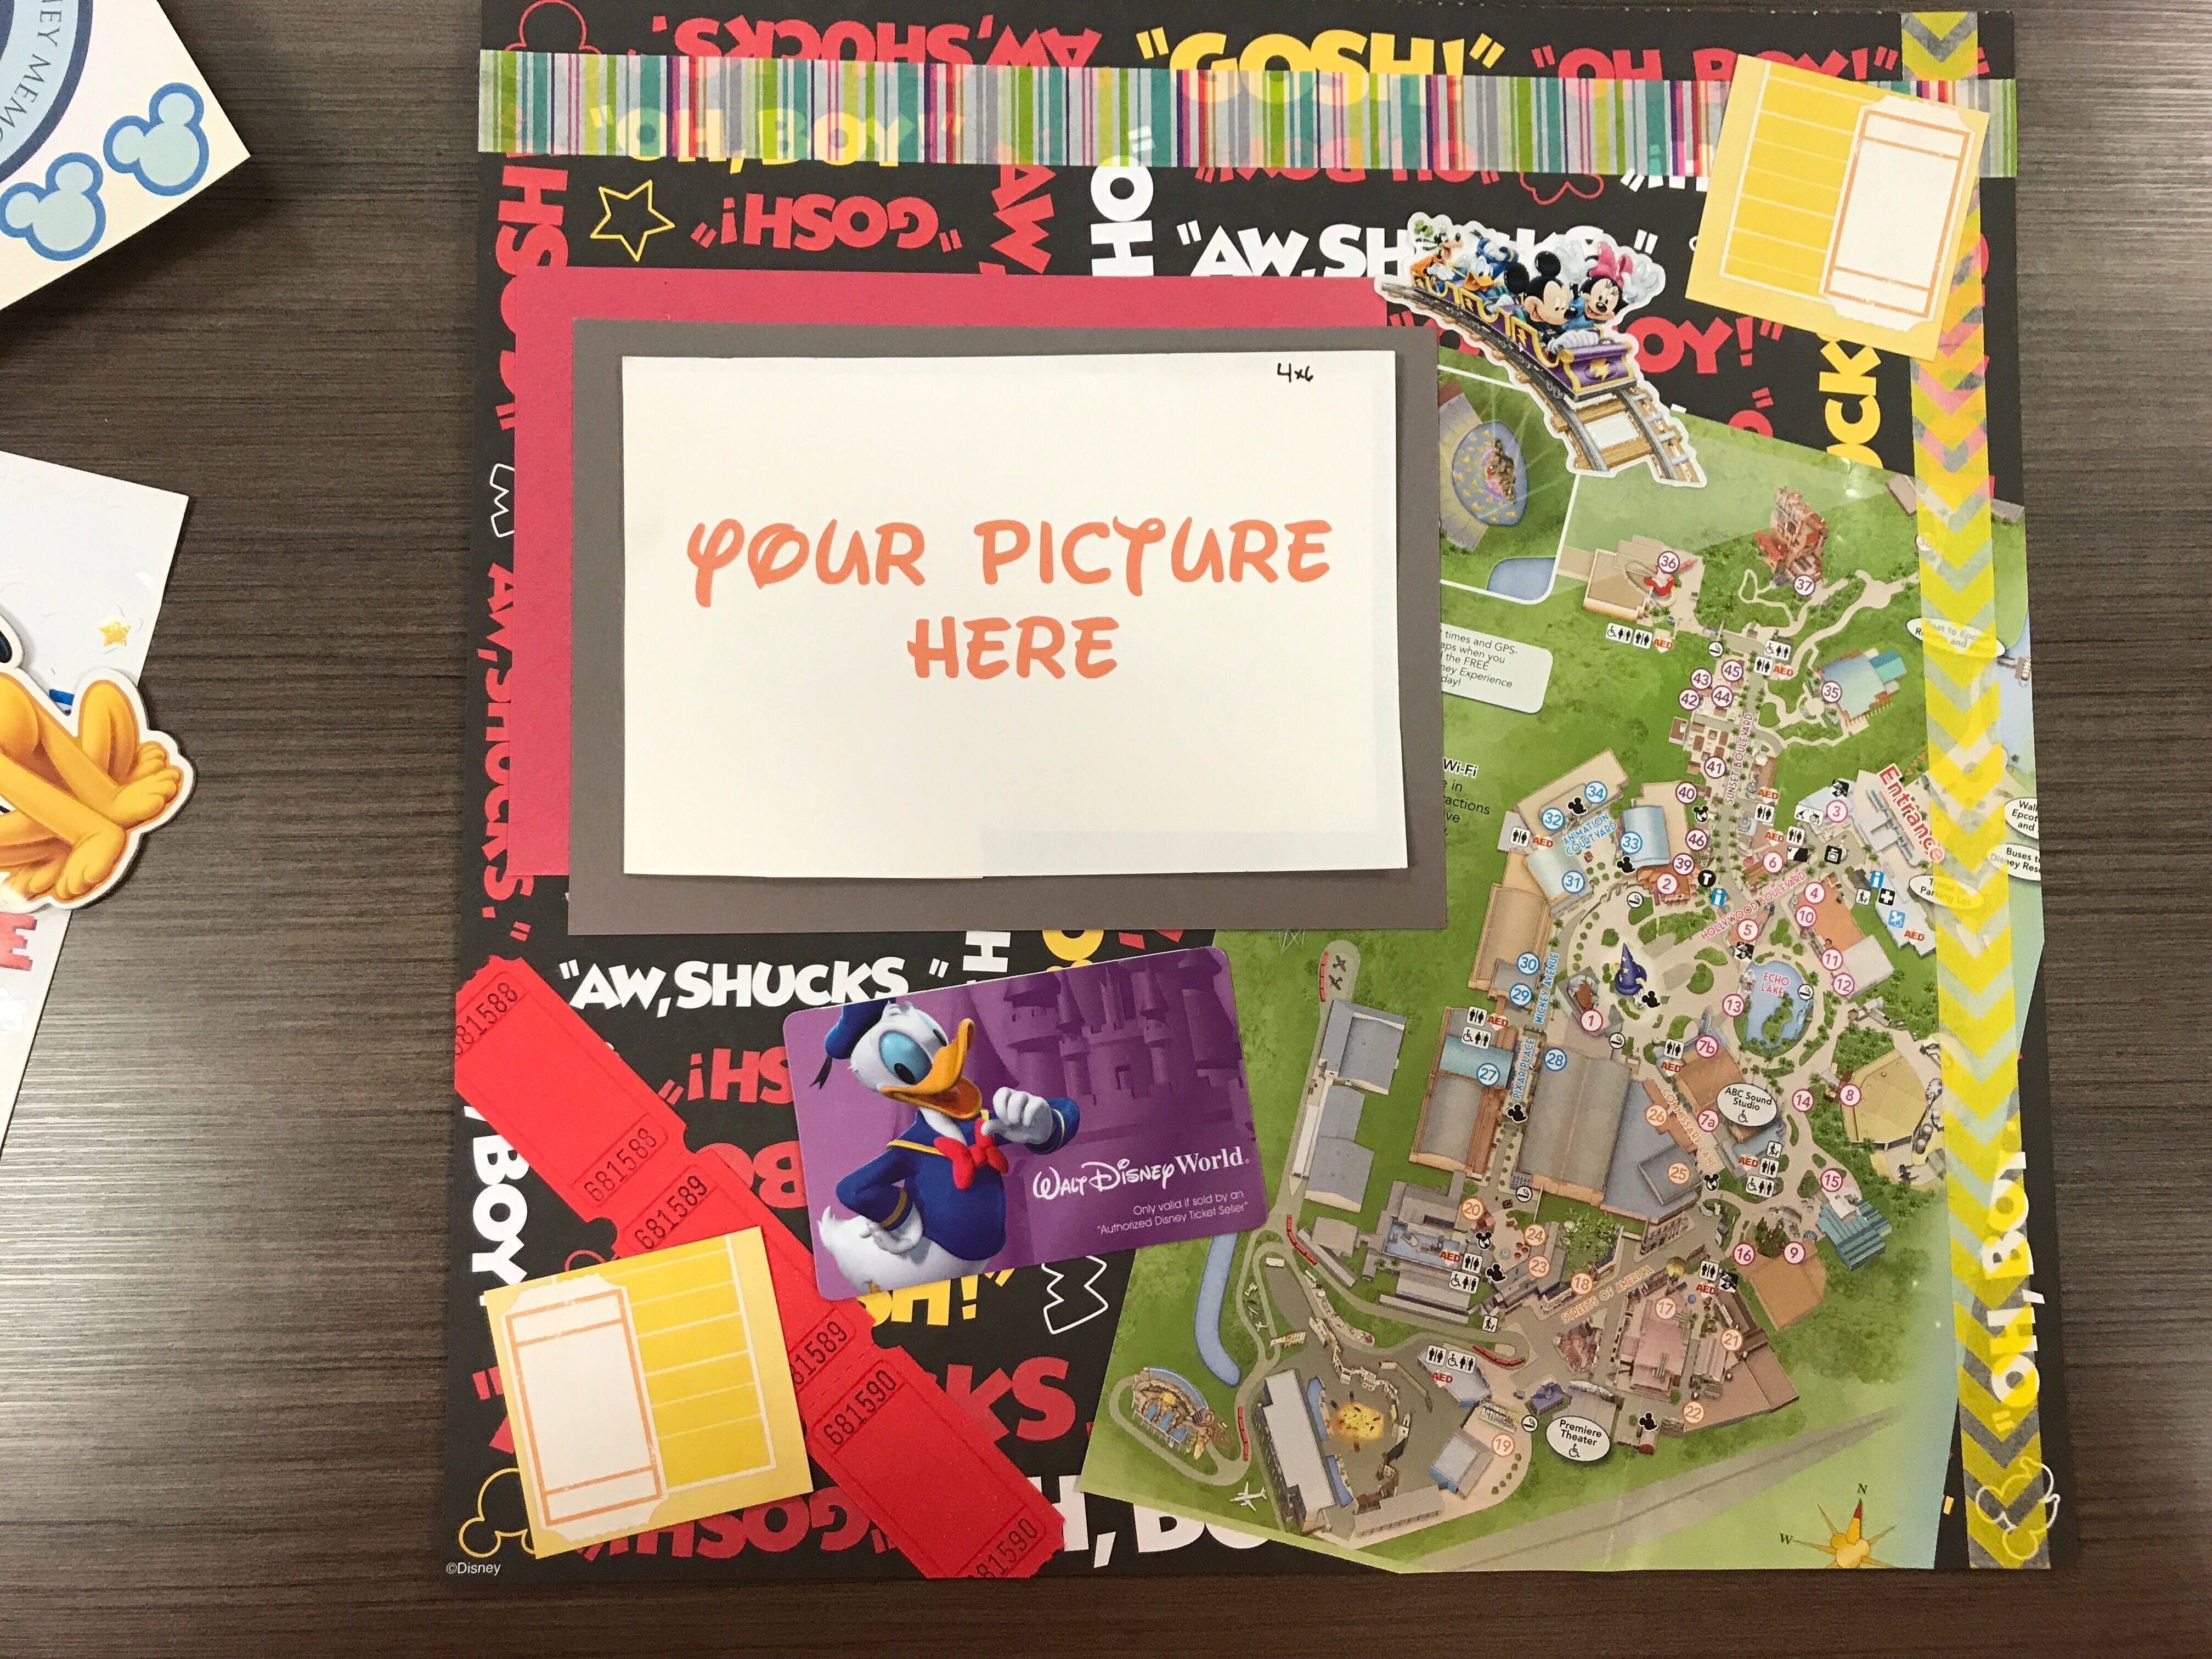 PHOTOS, VIDEO: Make Your Own Disney Scrapbook Page - A Step by